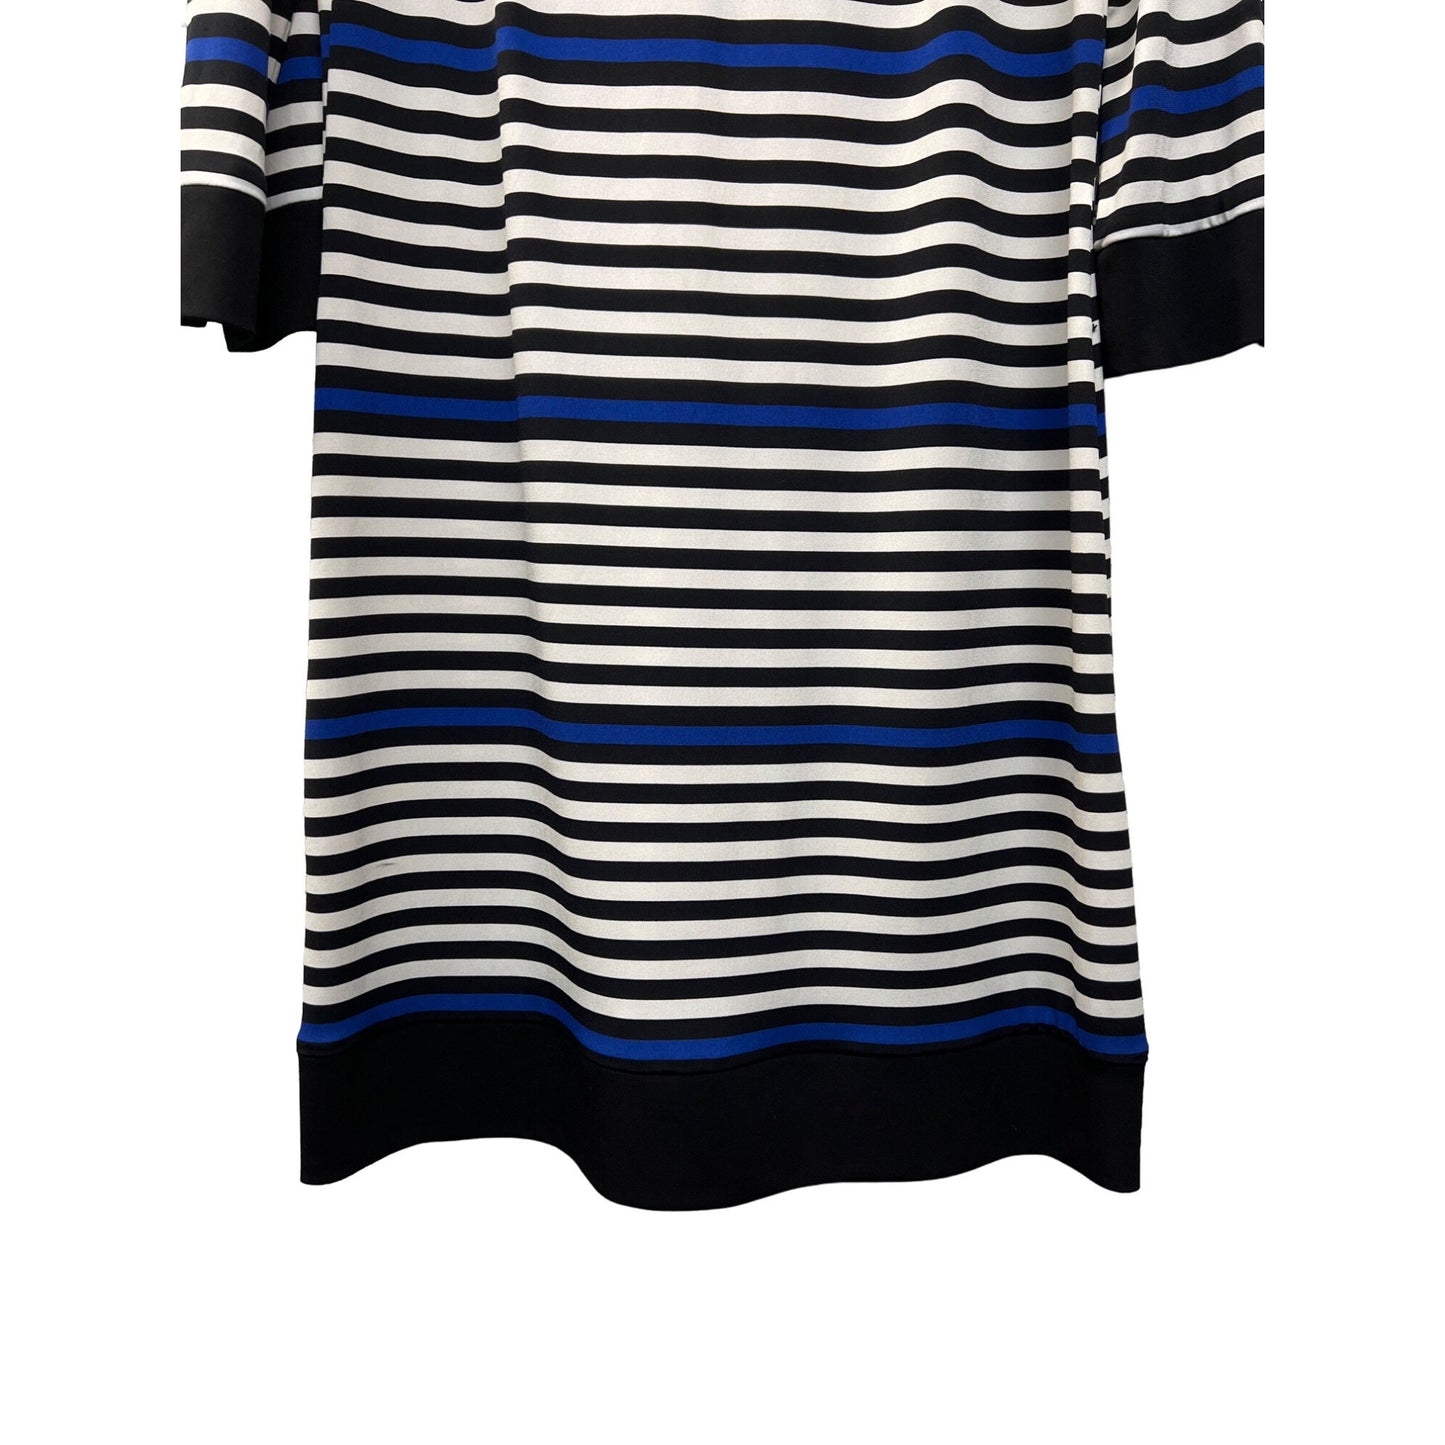 Laundry by Design Black White and Blue Striped Shirt Dress